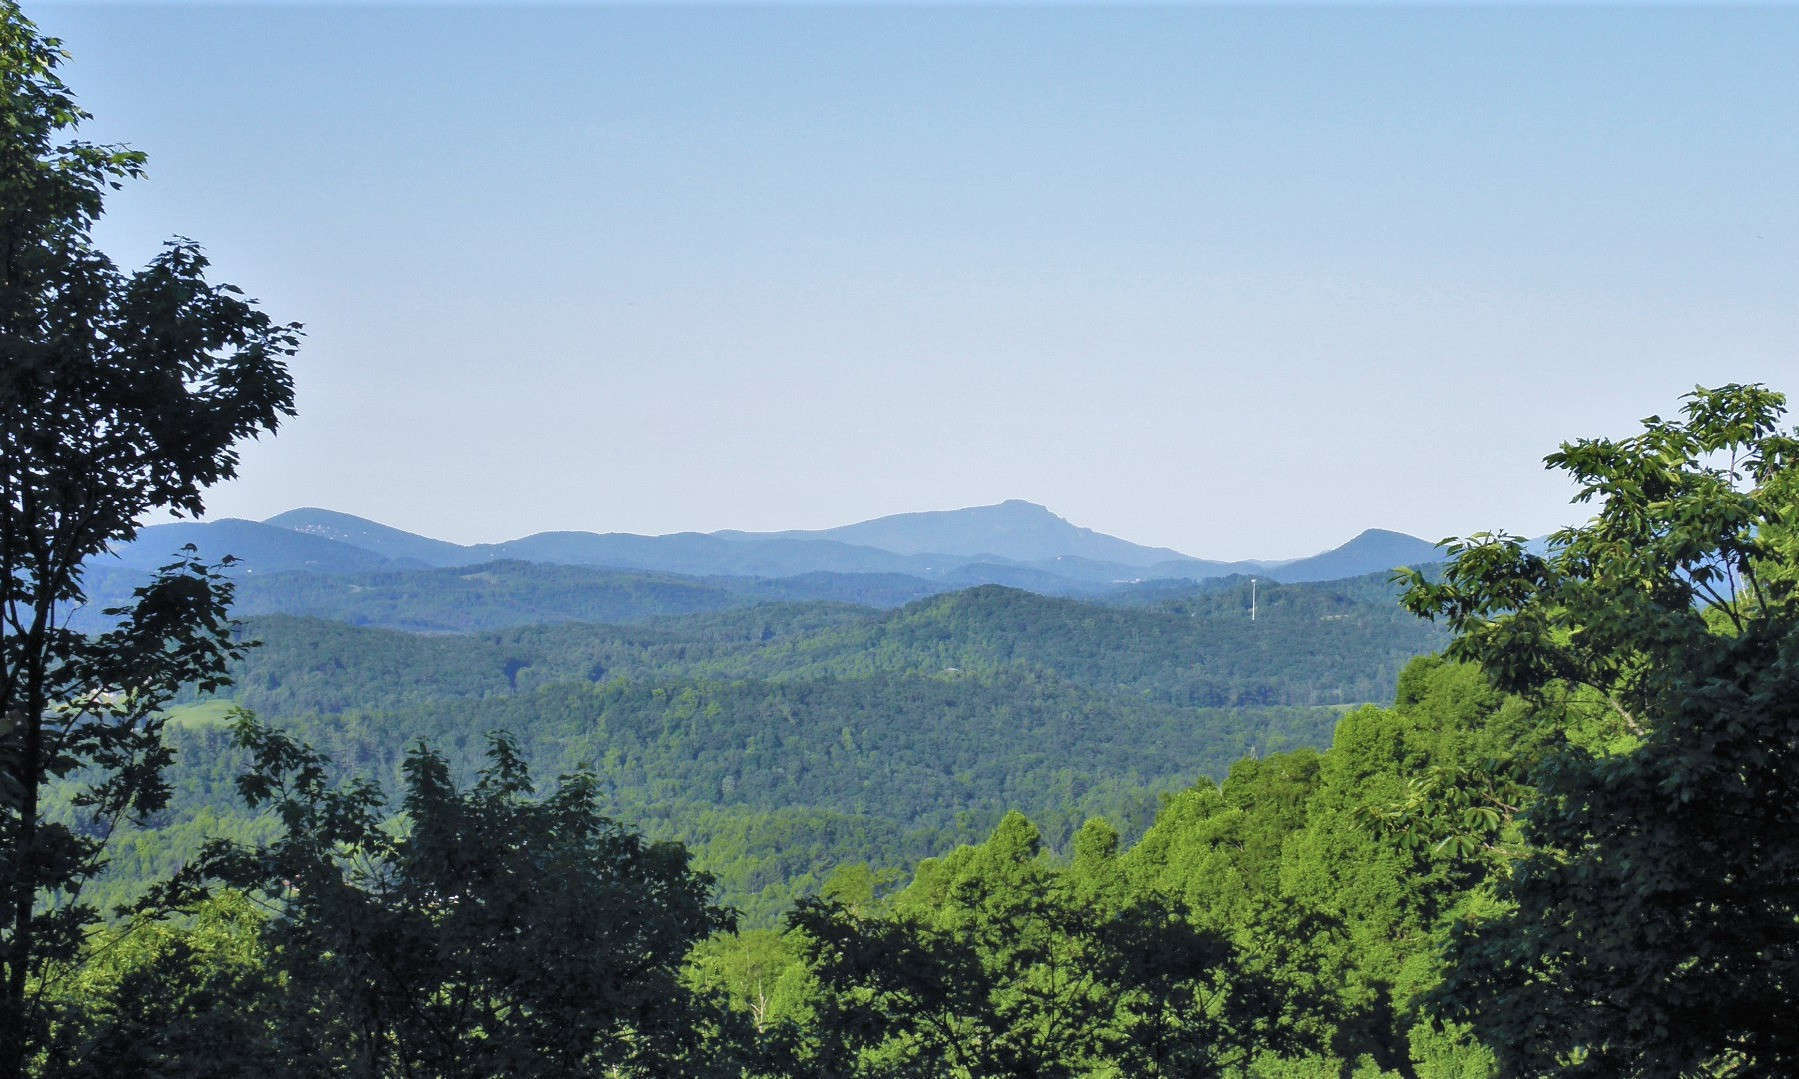 VIEWS, VIEWS, VIEWS with this 4 acre tract located in Noah's Ridge a quiet community in the Fleetwood area of Southern Ashe County.